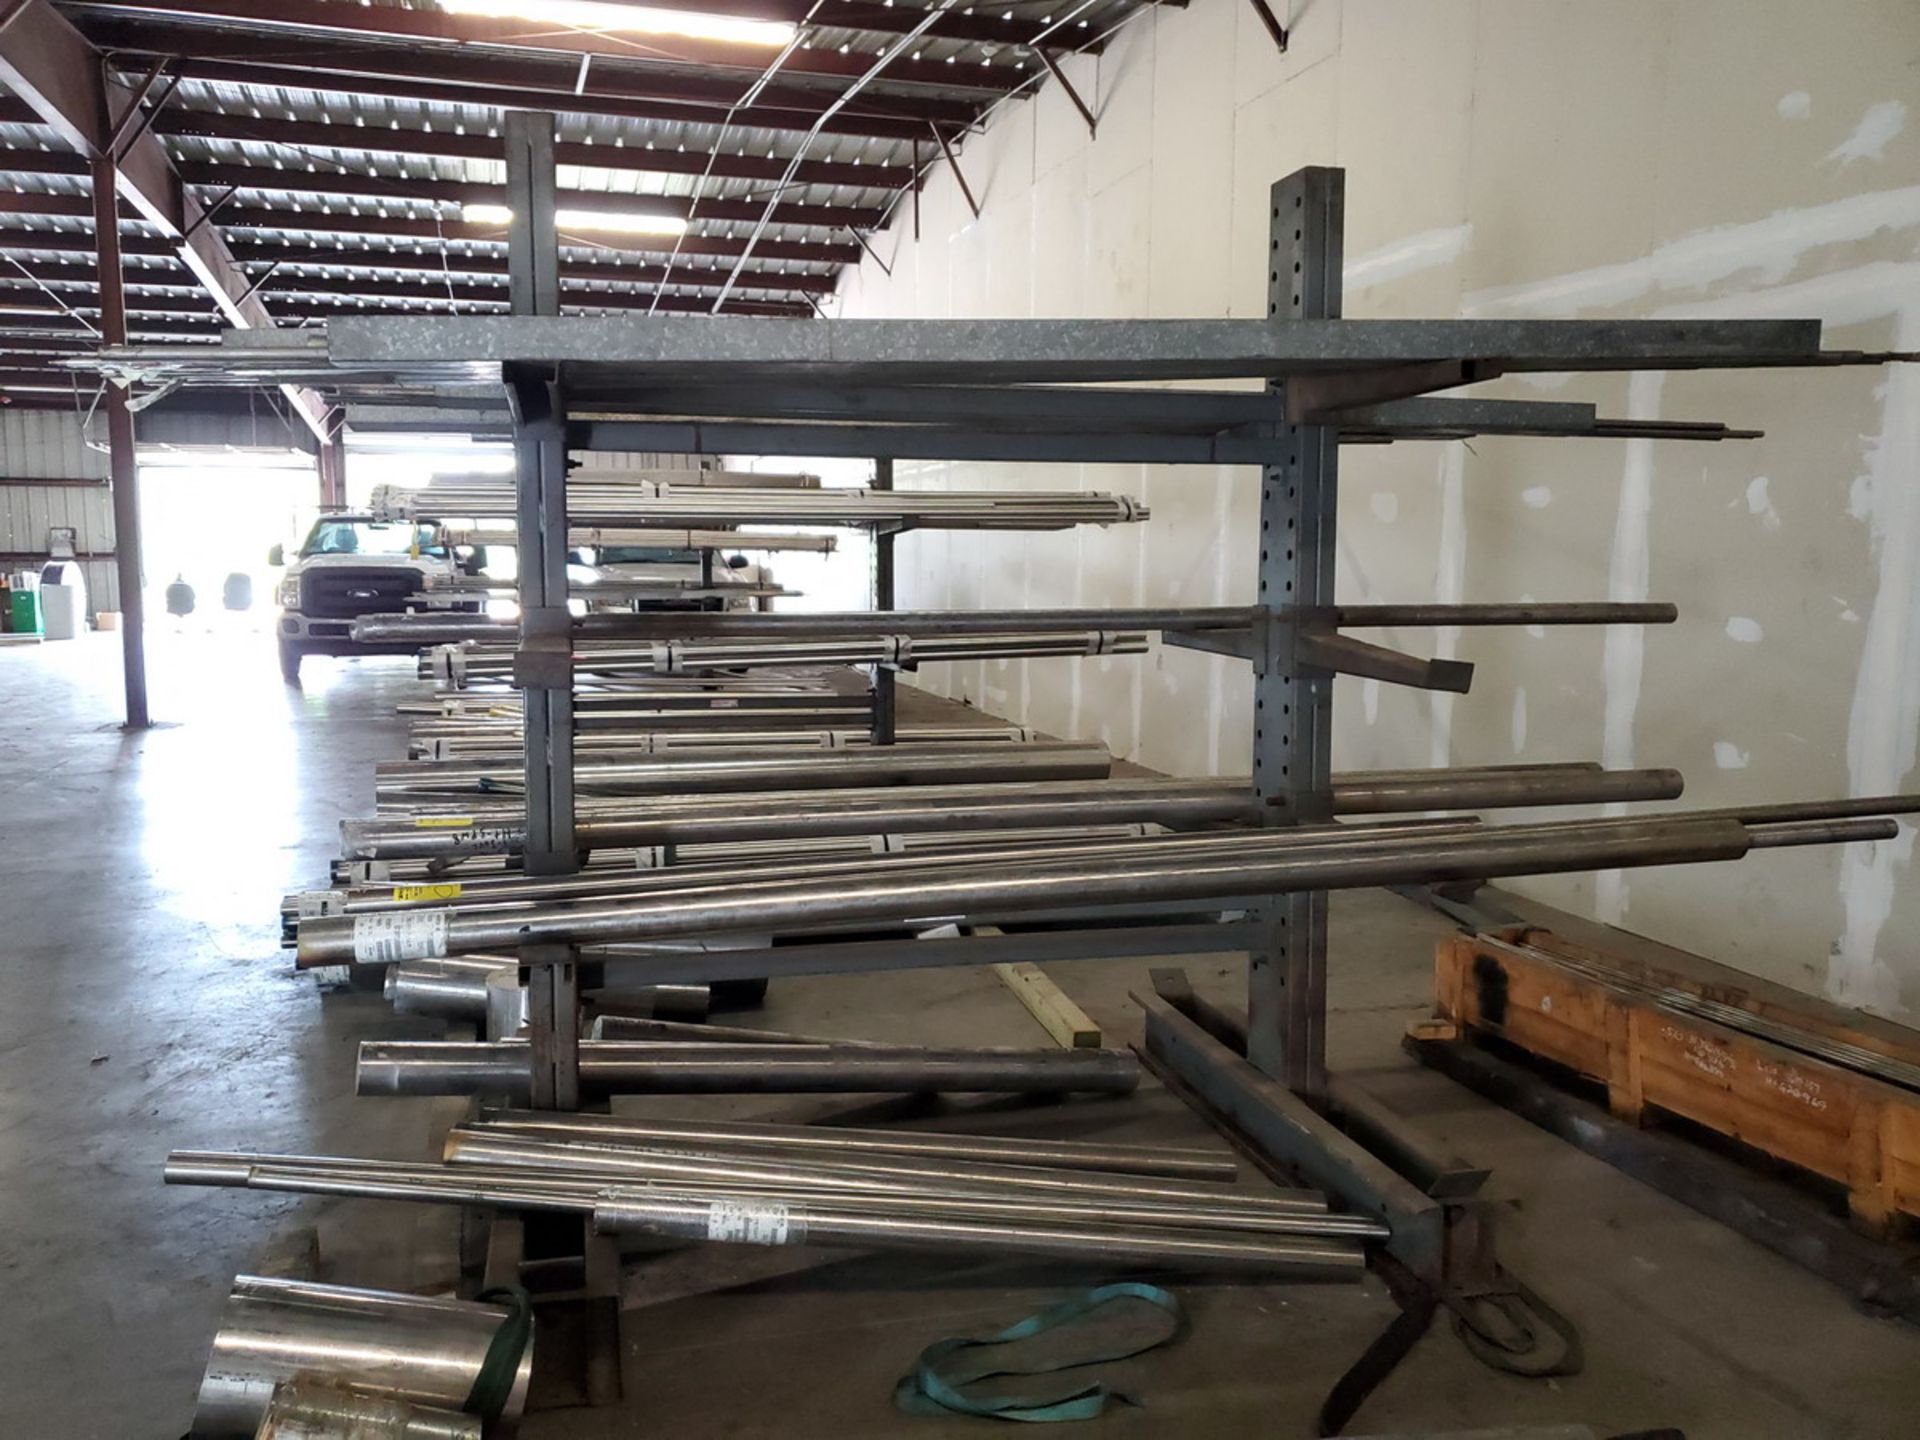 Double-Sided Cantilever Rack 77" x 64" x 96", 2' Deep (Matl. Excluded) - Image 4 of 4